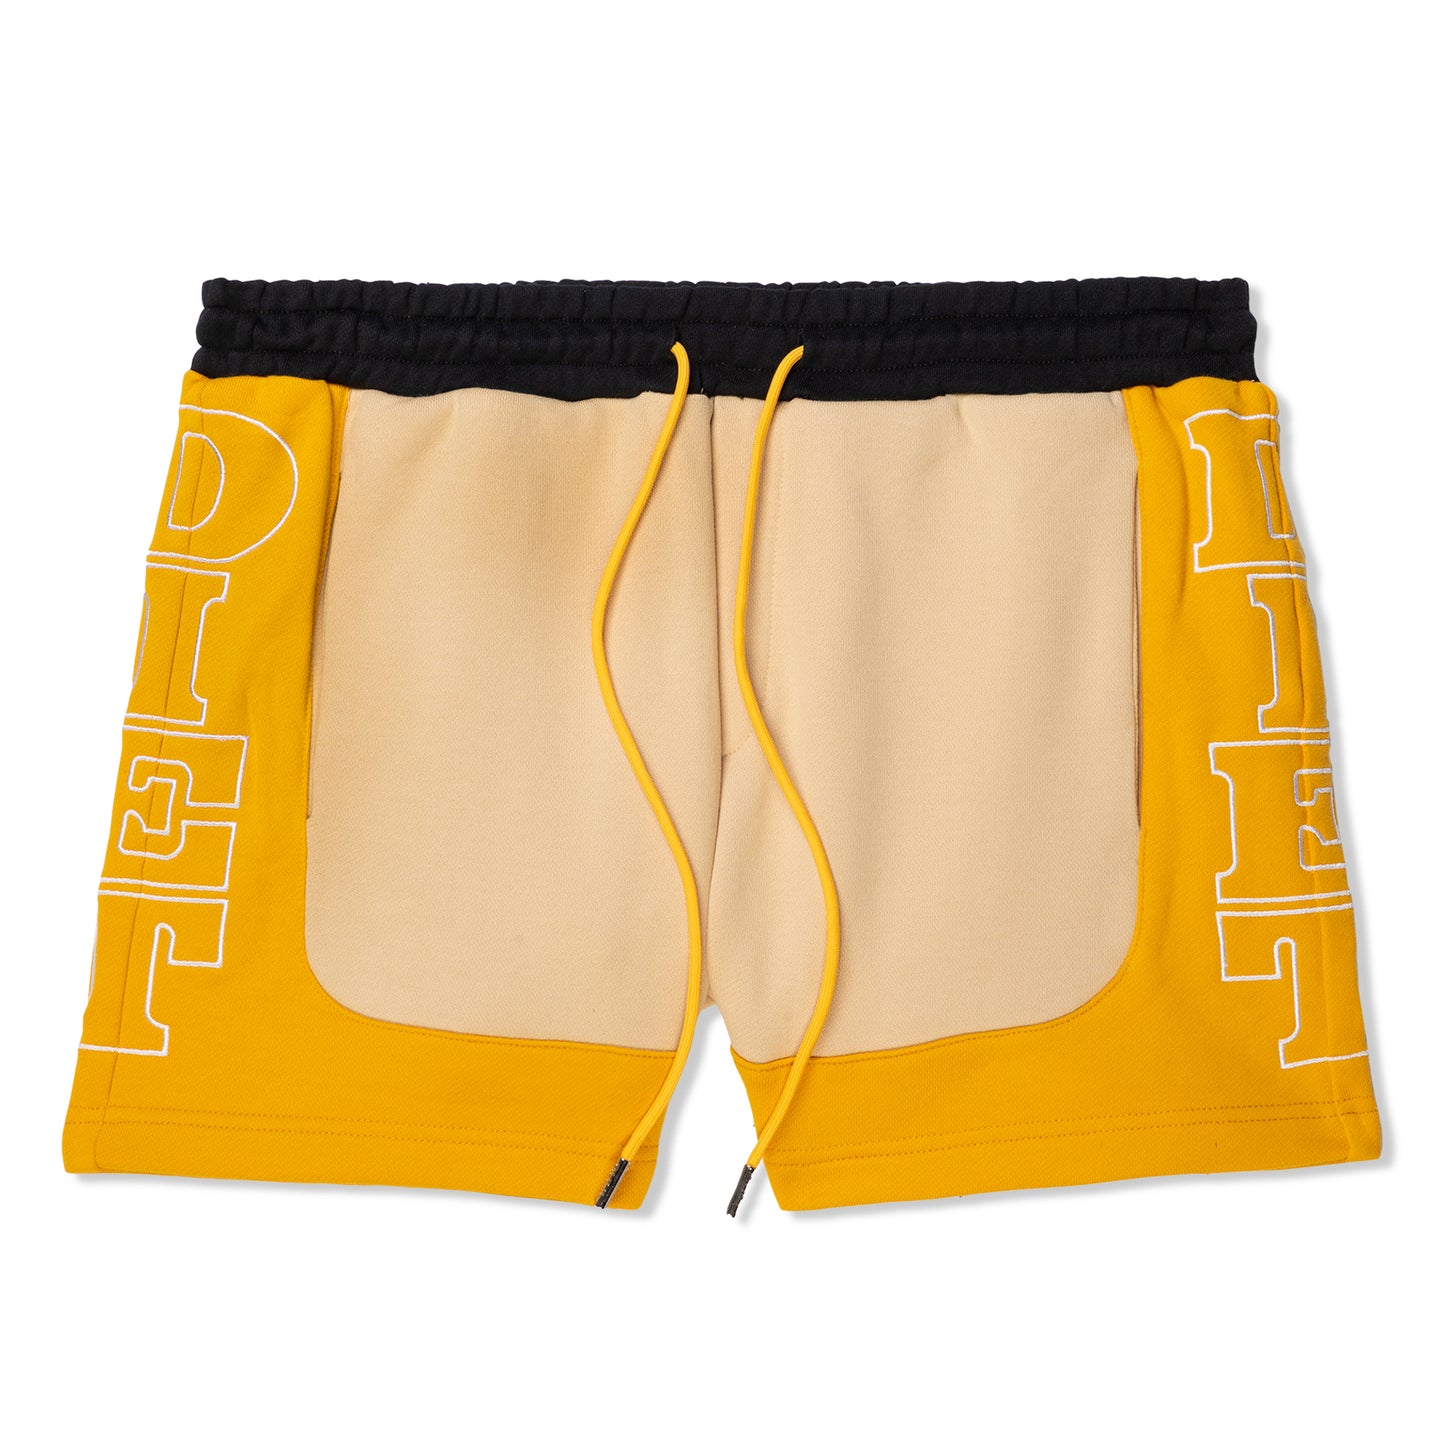 Diet Starts Monday French Terry Row Shorts (Tan/Yellow)